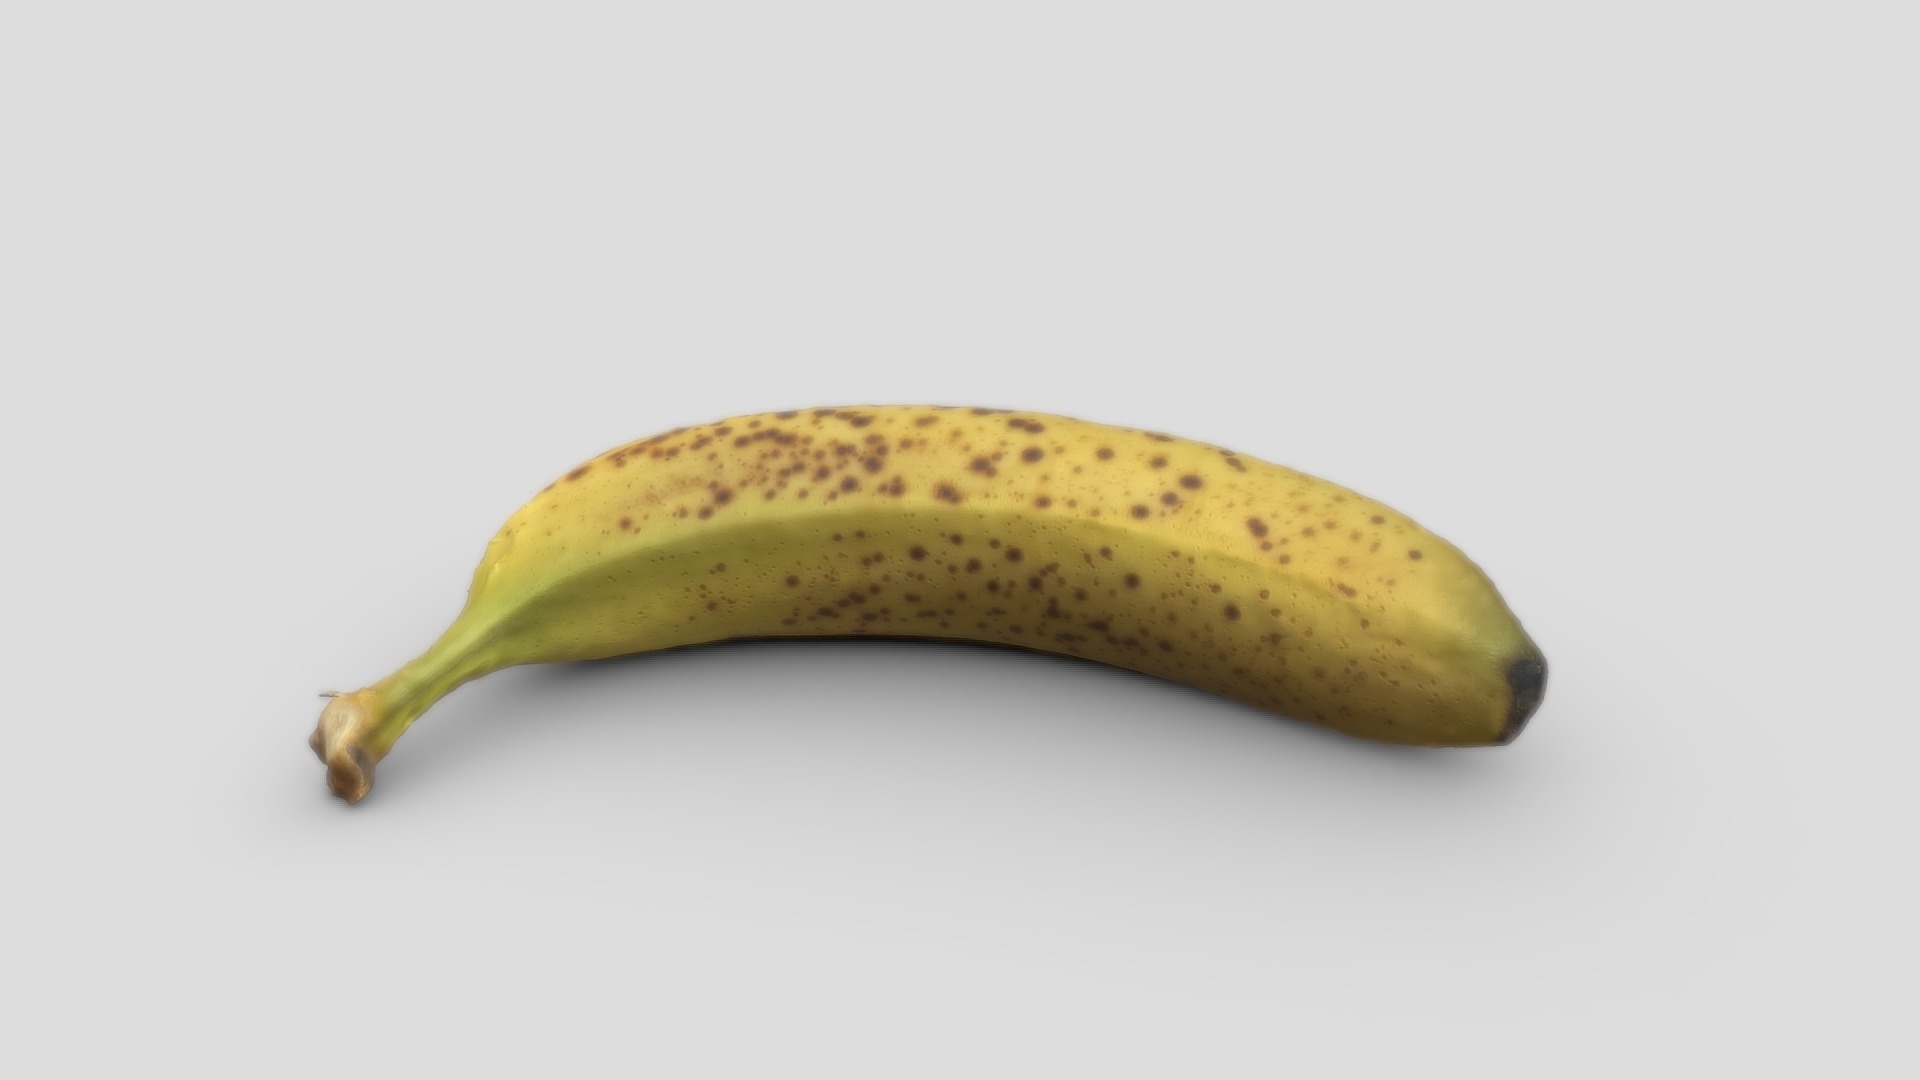 3D model Banana for scale - This is a 3D model of the Banana for scale. The 3D model is about a banana on a white background.